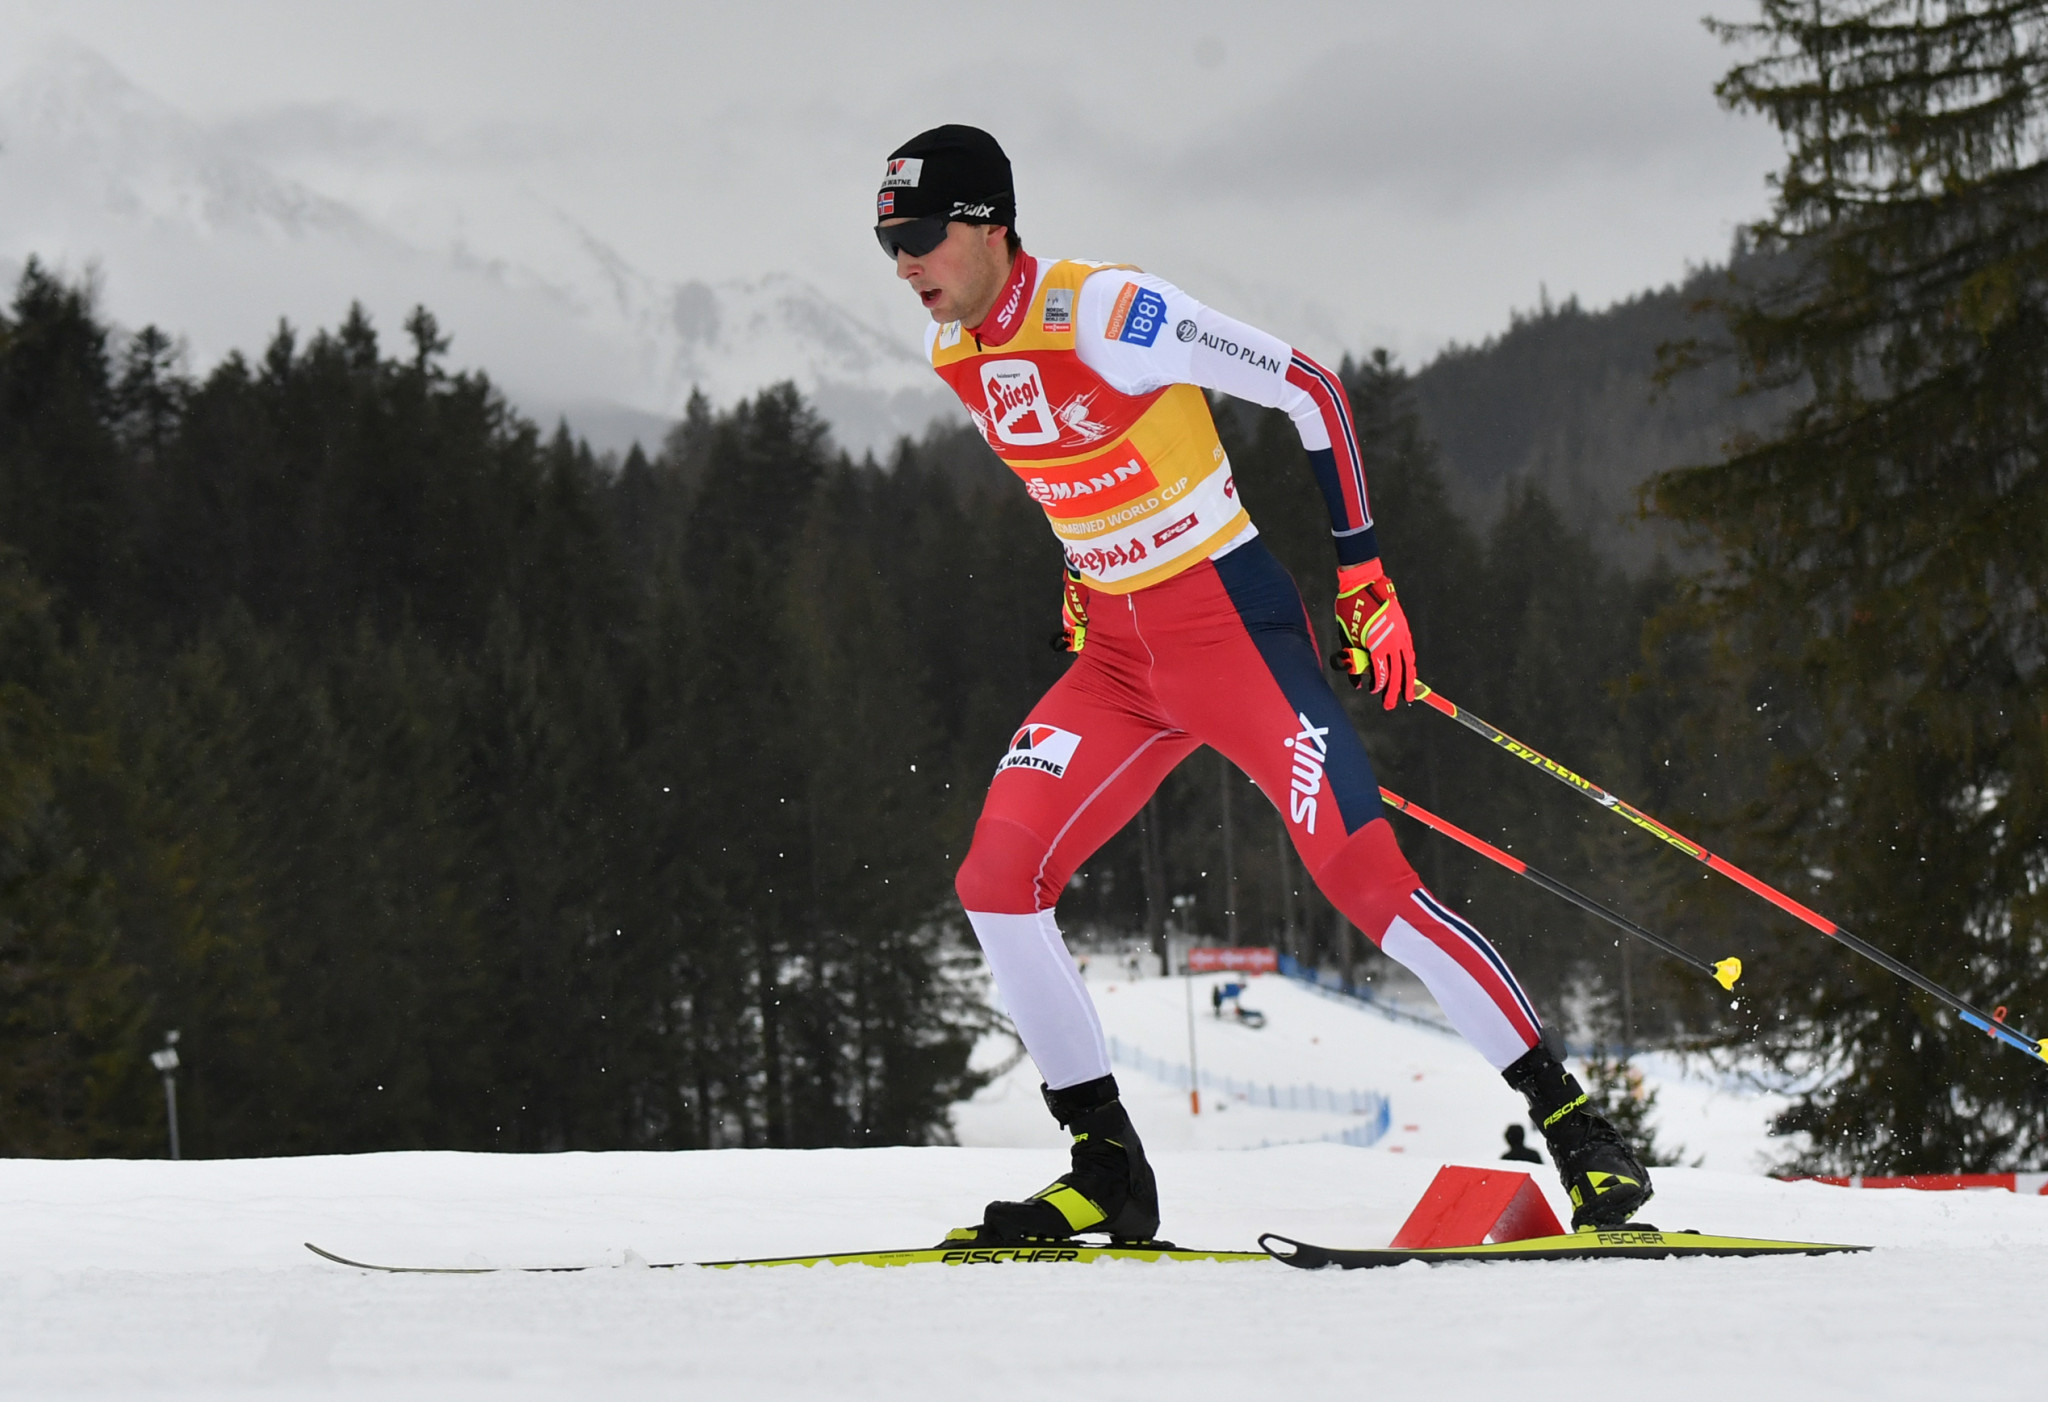 Online voting is now open for the 2020 Nordic Combined Awards ©Getty Images